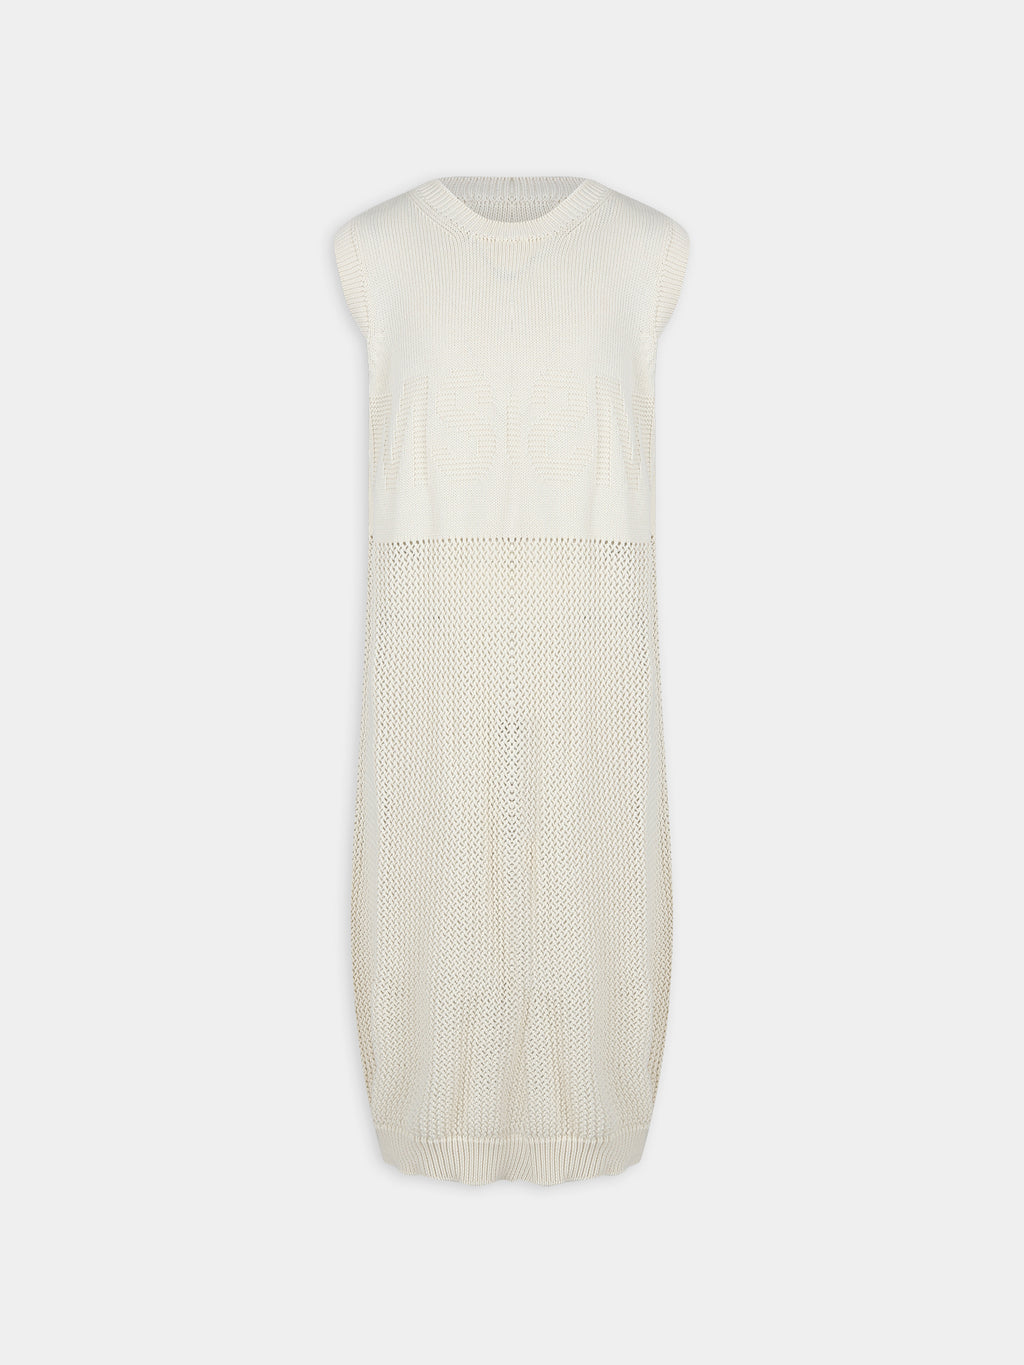 Ivory dress for girl with logo